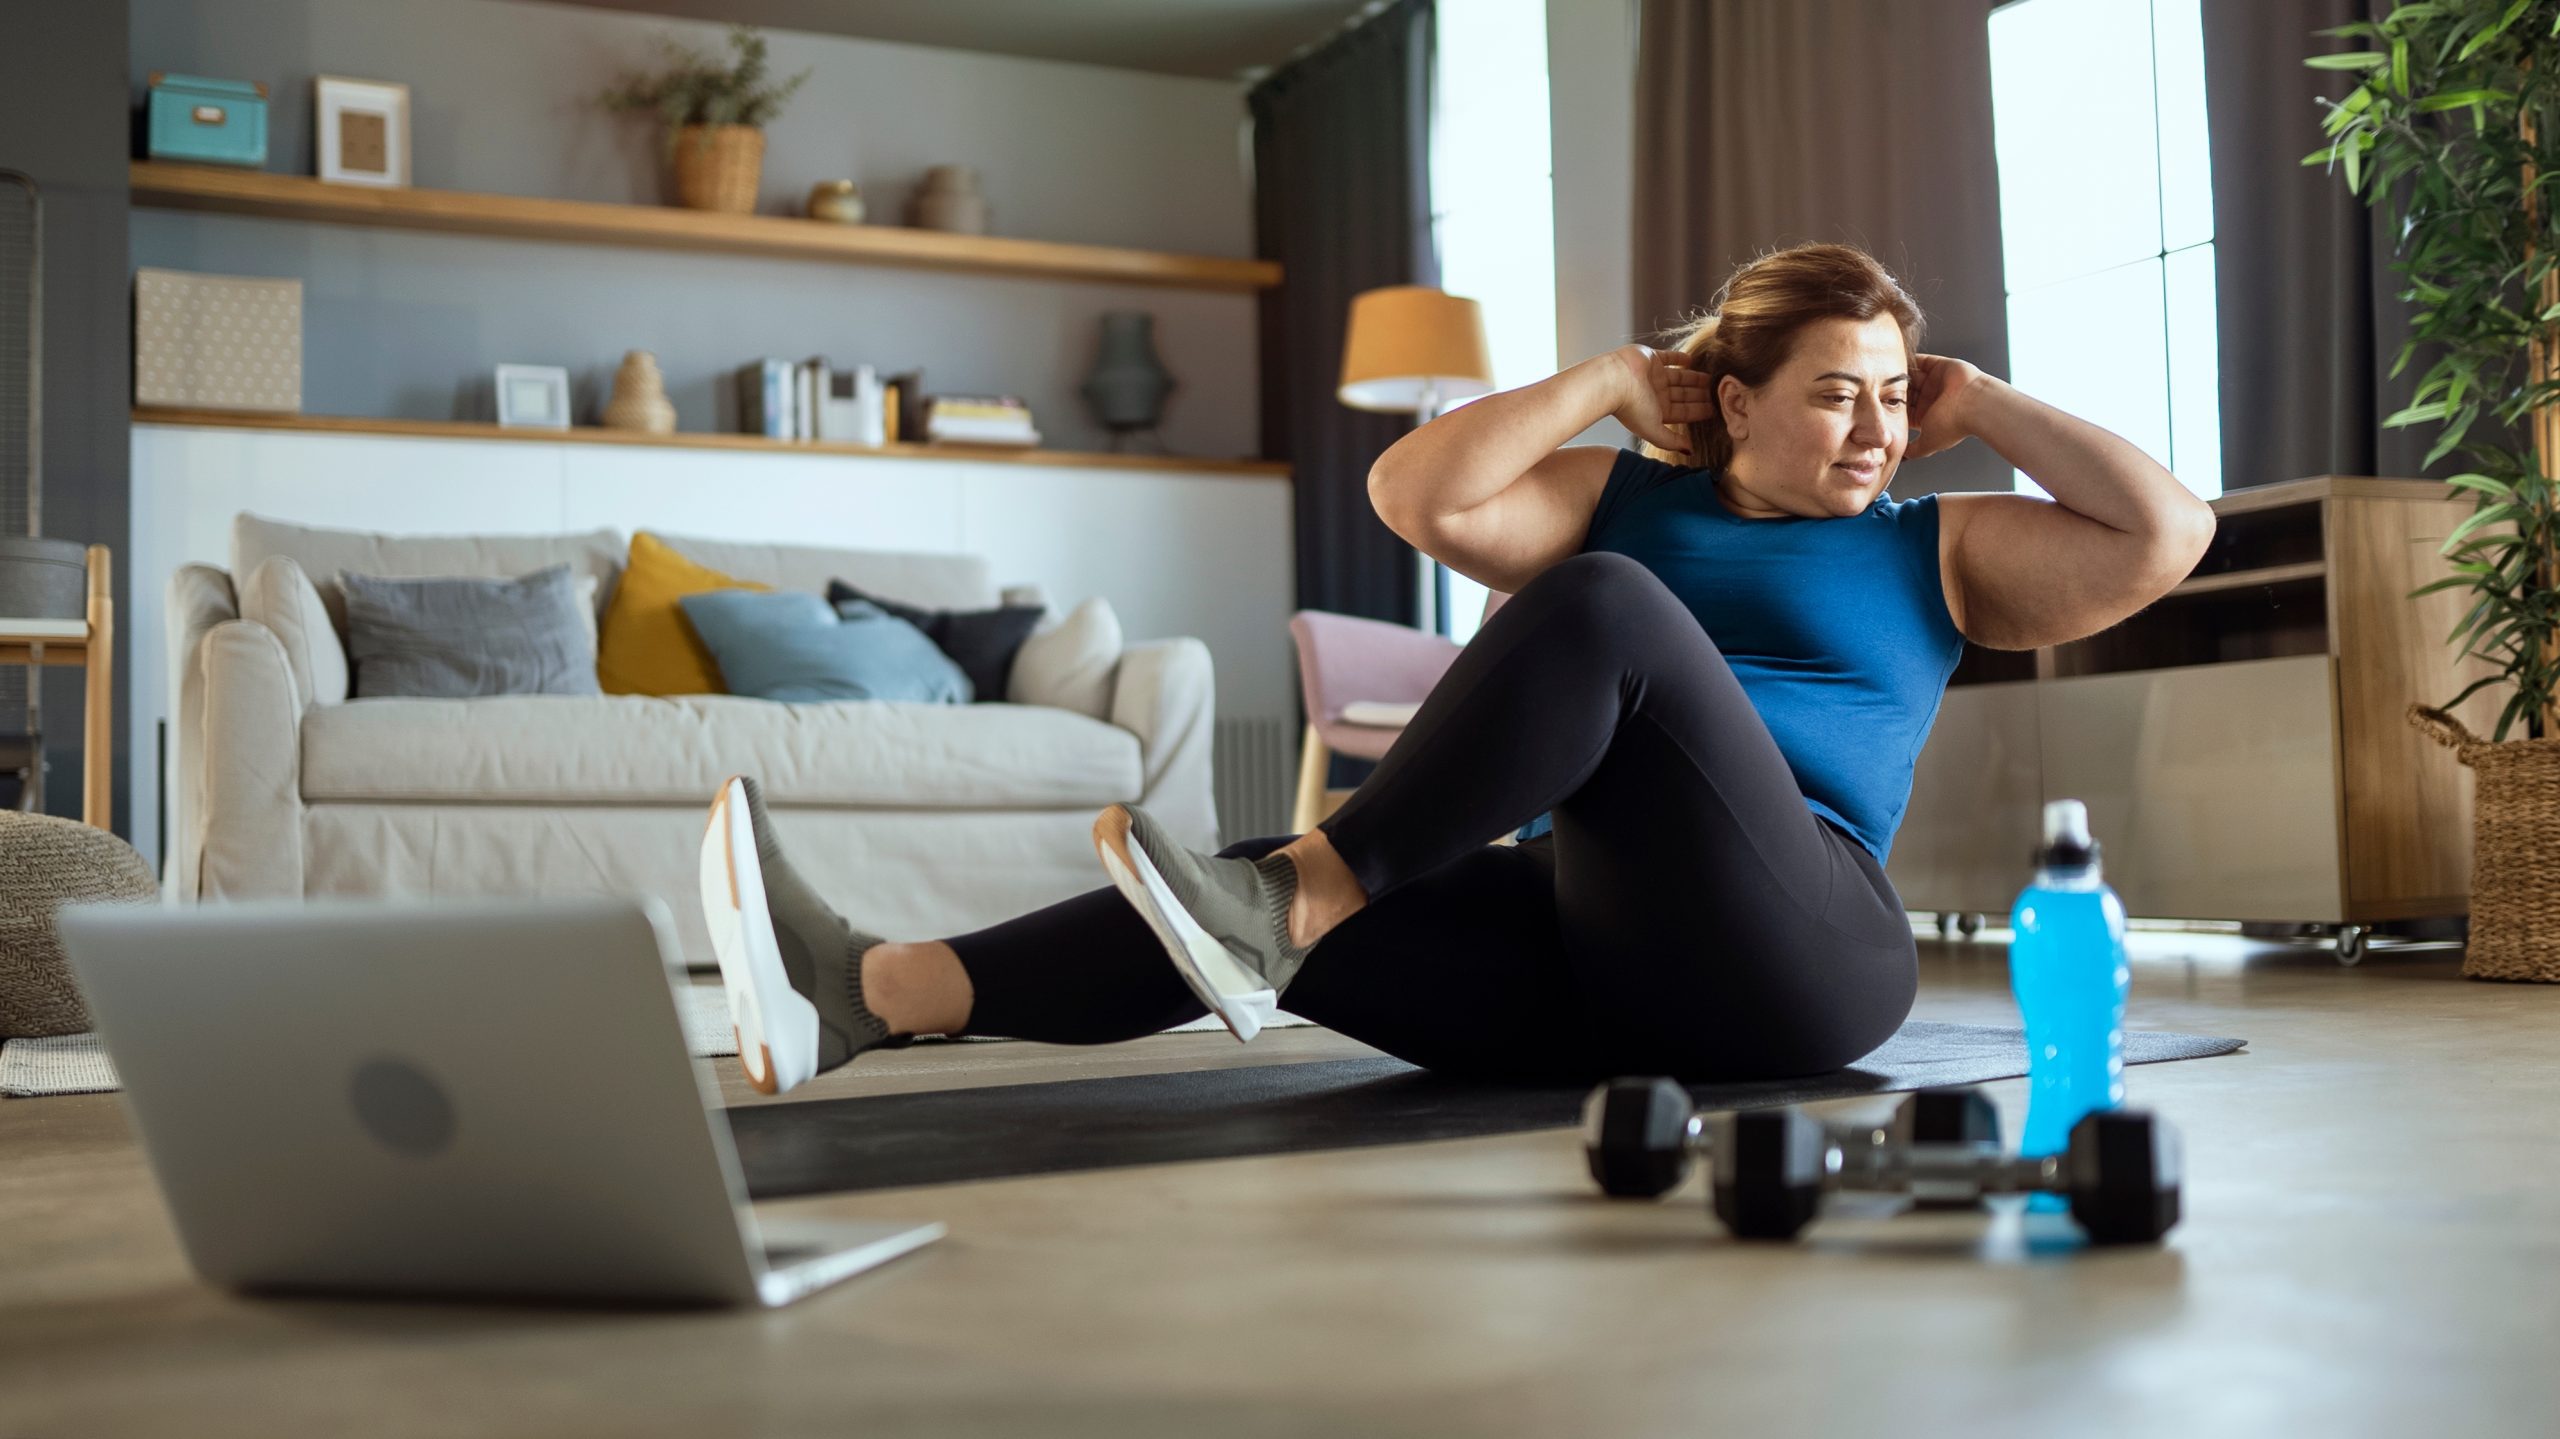 Woman doing crunches on exercise mat in front of her laptop at home